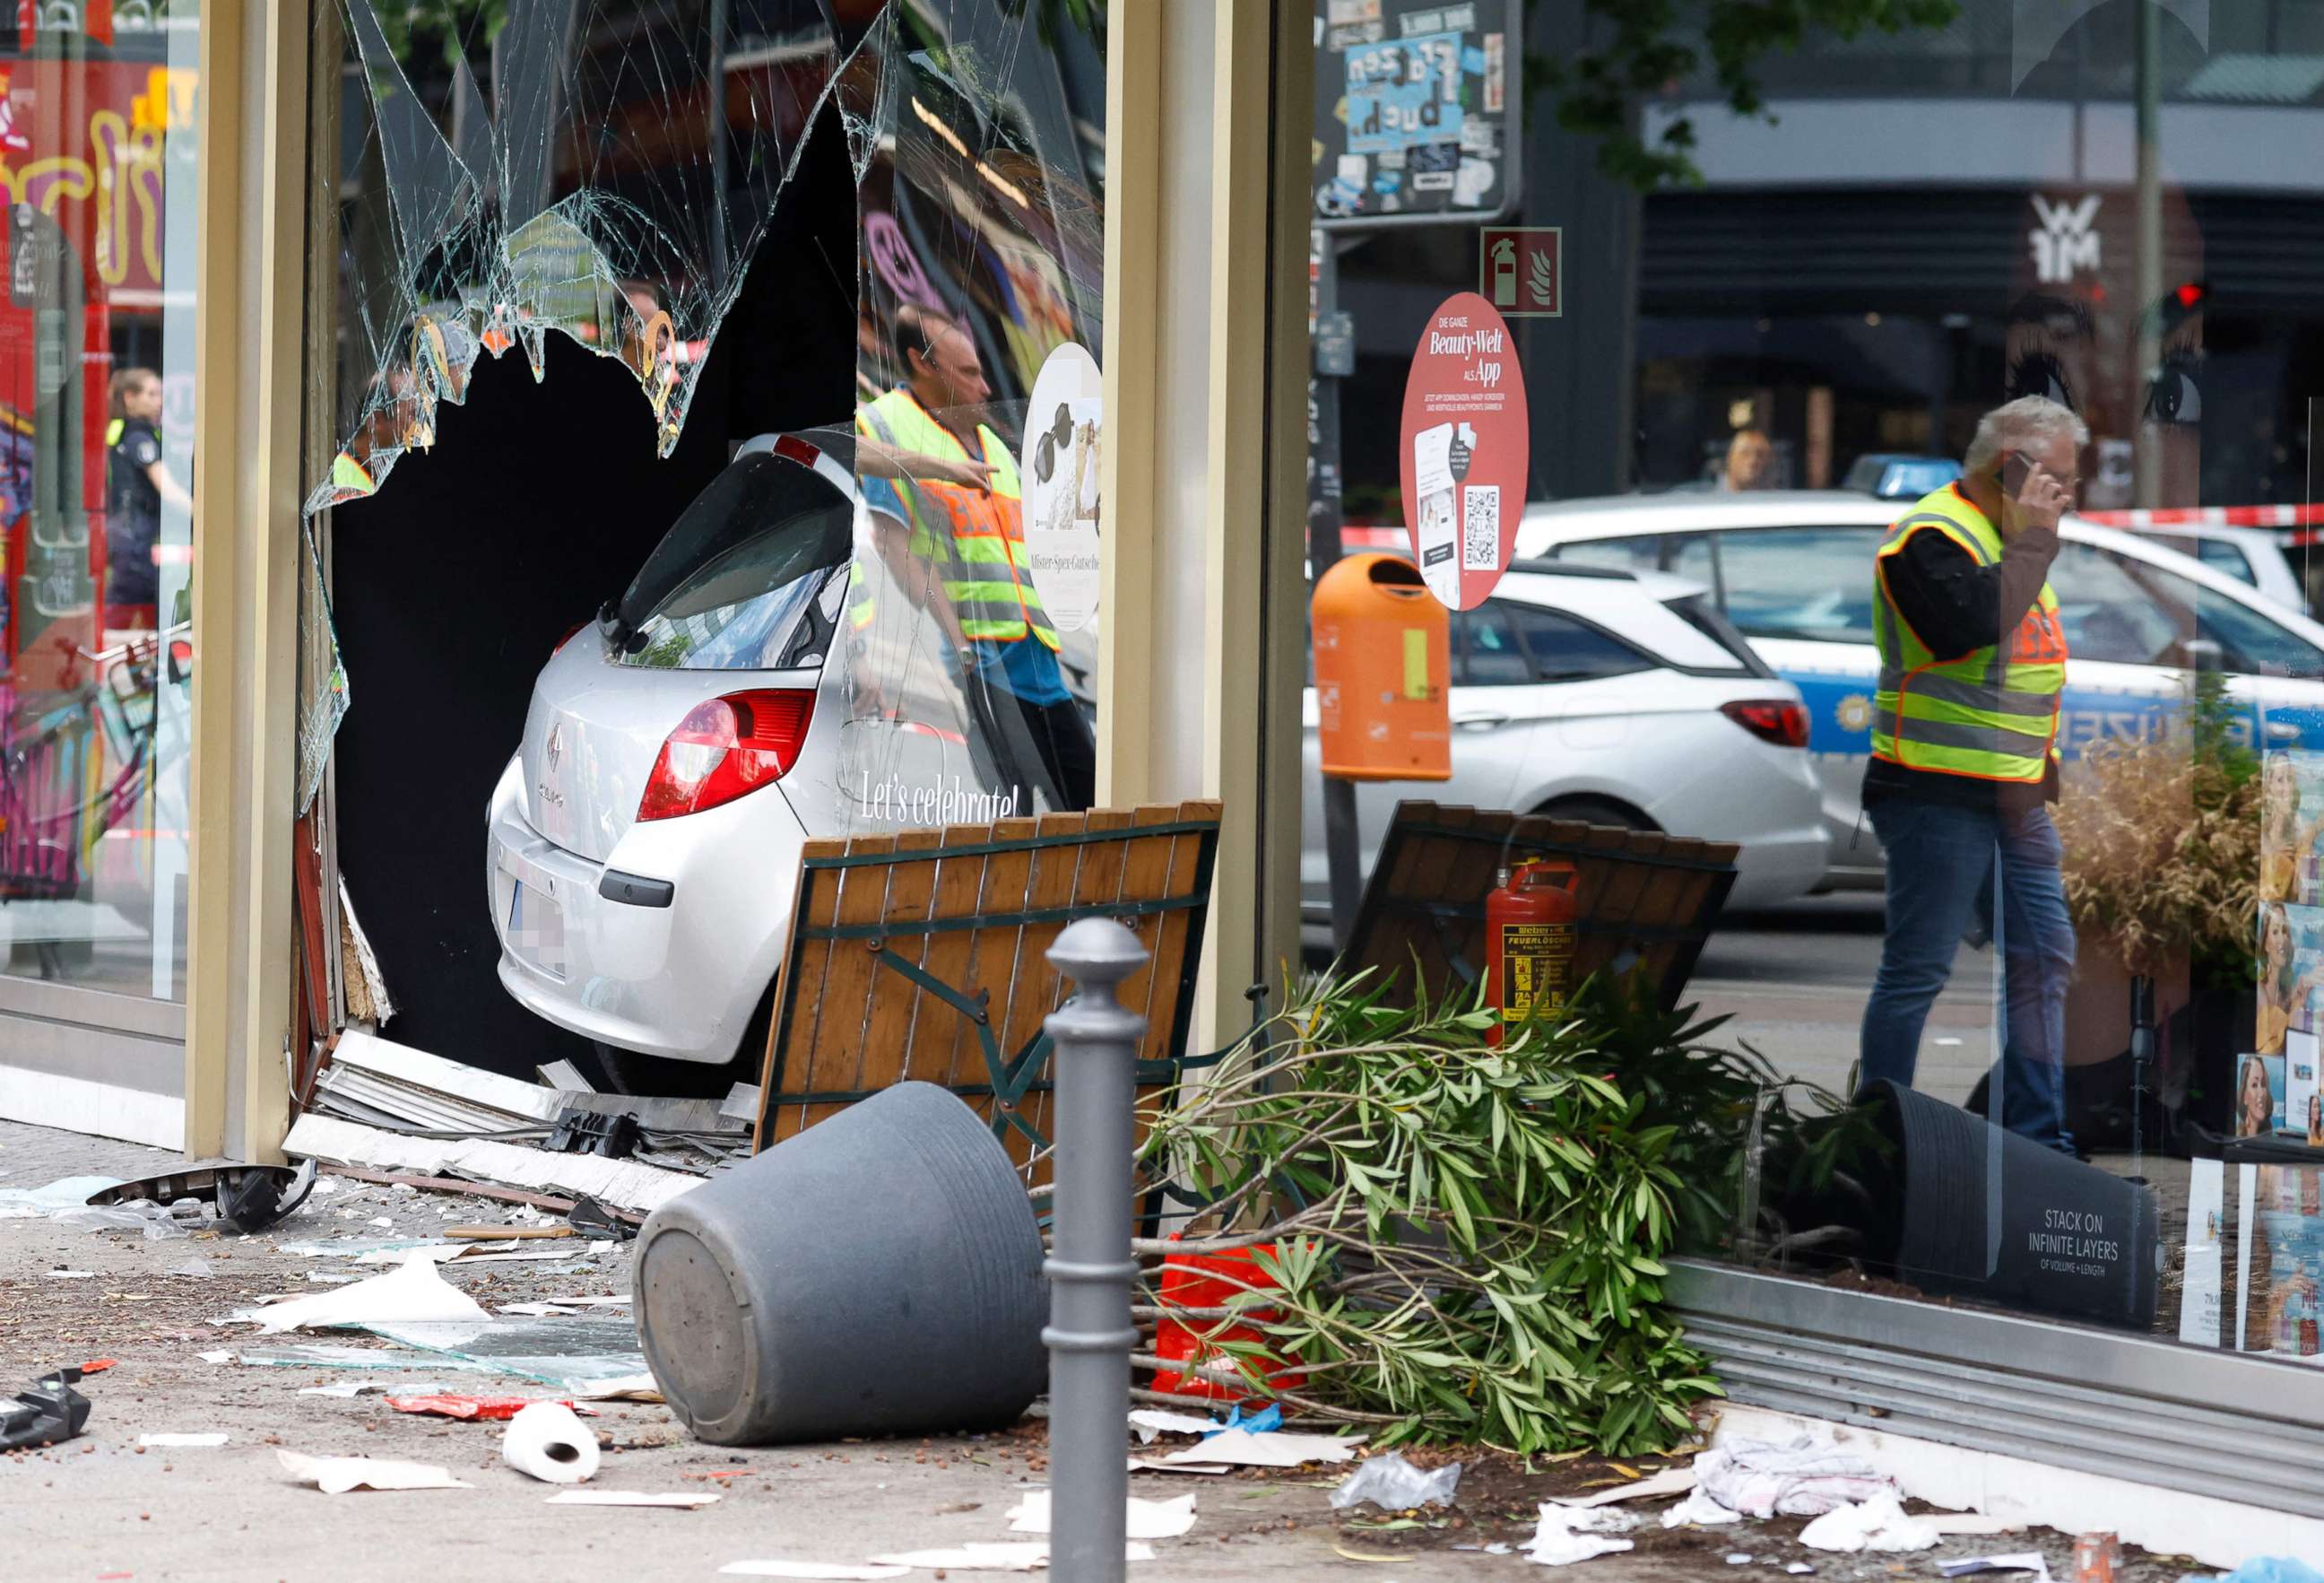 PHOTO: The car that was driven into a group of people is pictured in central Berlin, June 8, 2022.